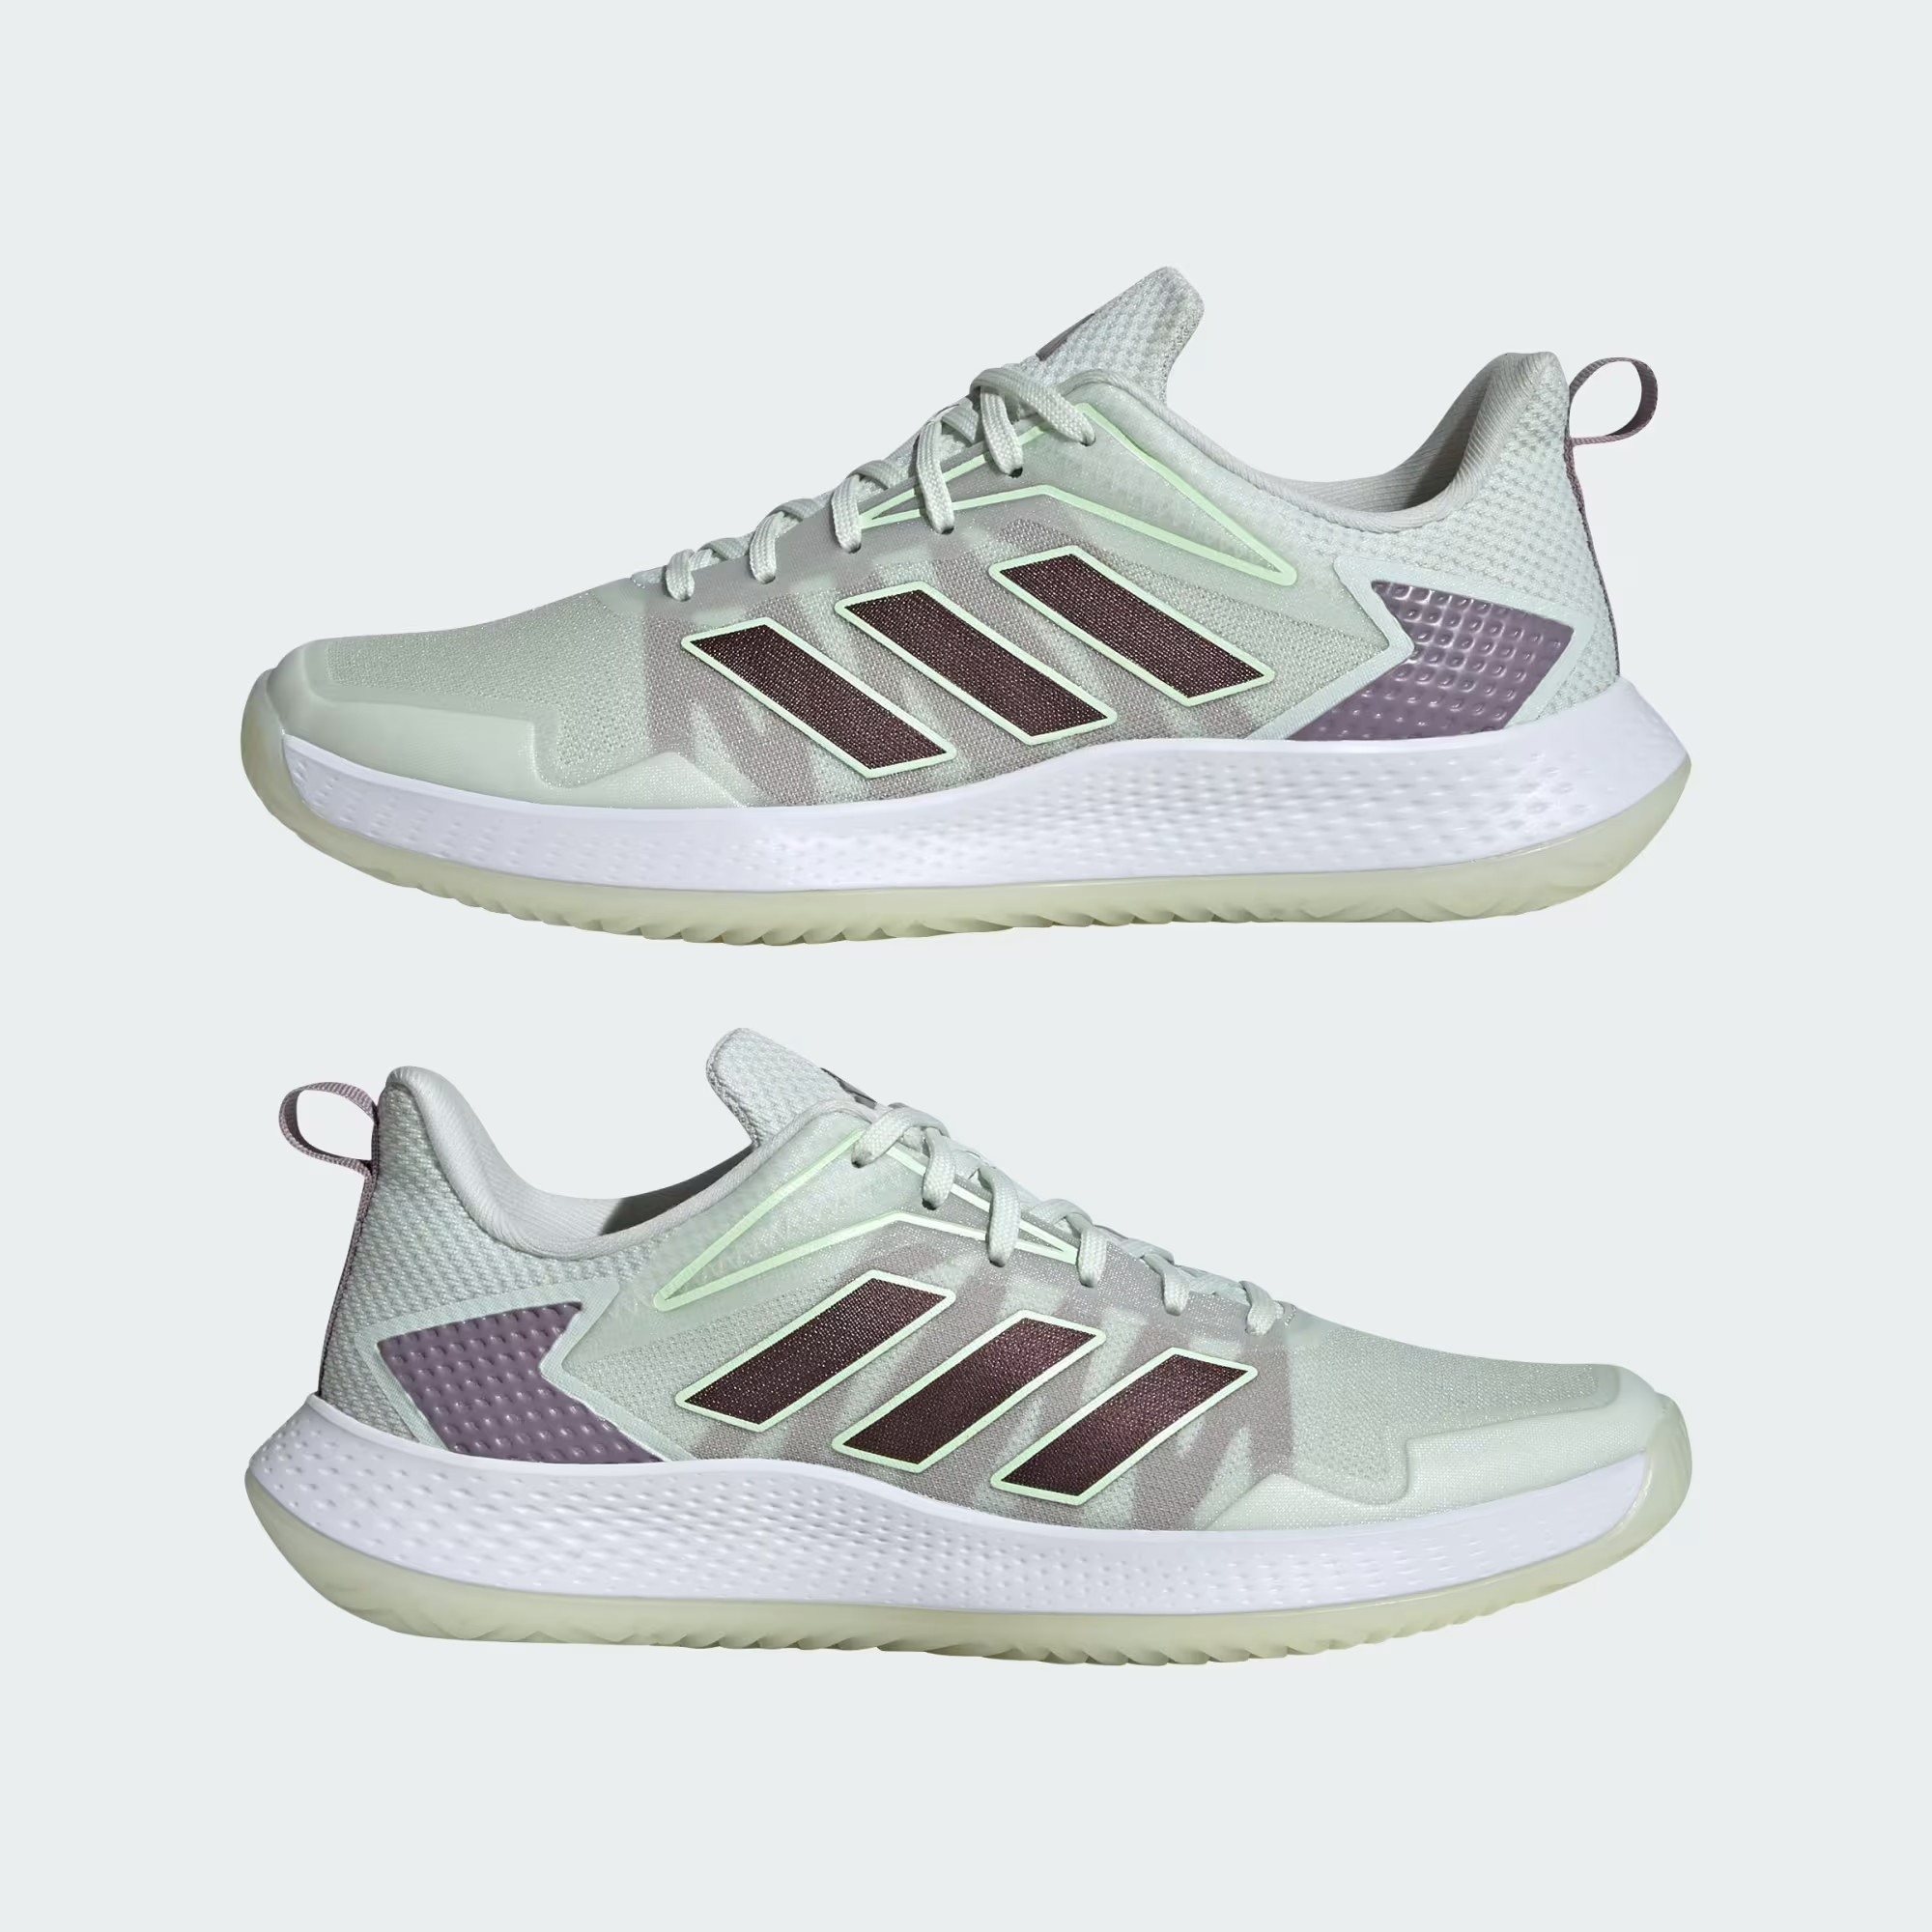 CHAUSSURES ADIDAS DEFIANT SPEED - FEMME